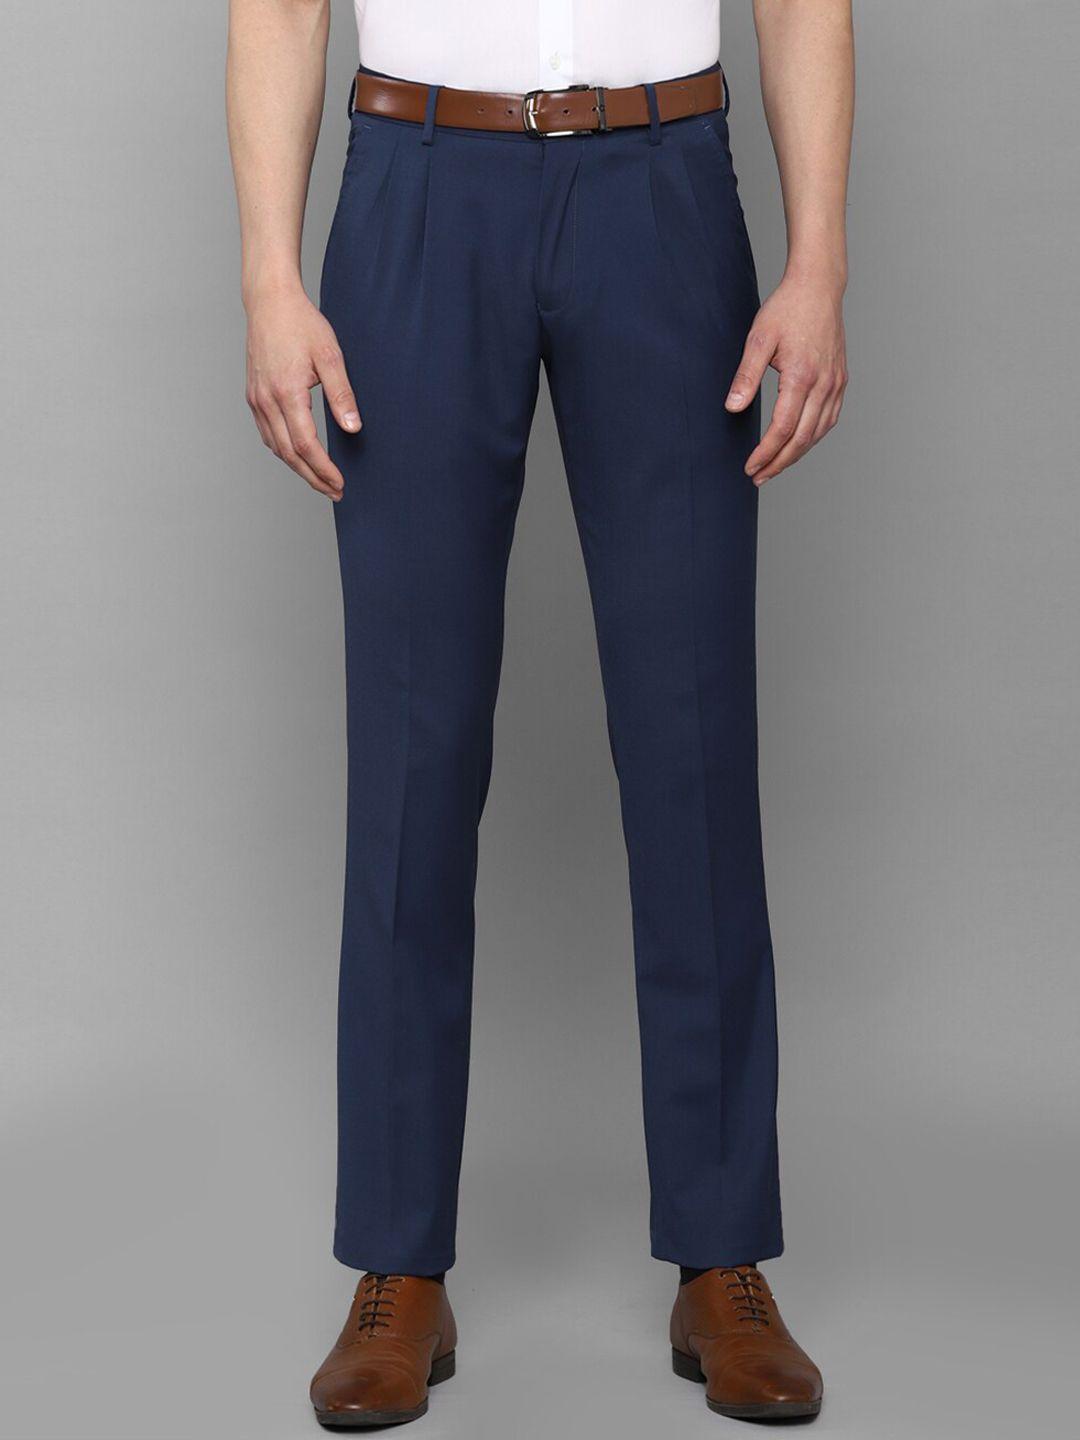 louis philippe men navy blue pleated trousers